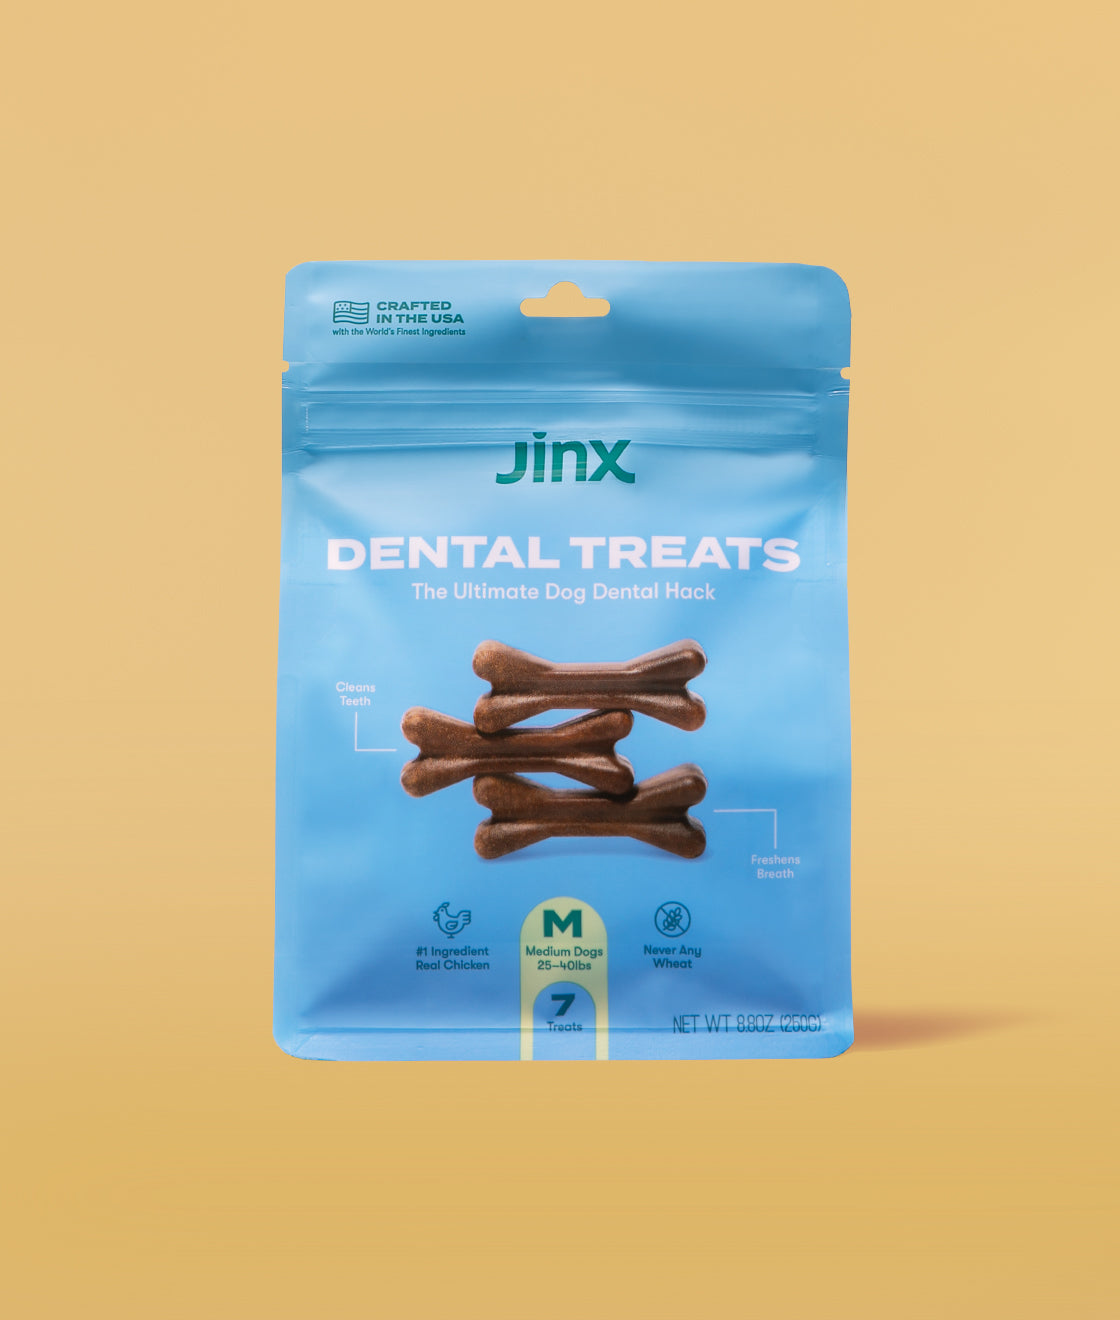 Dental treats Jinx product packaging on a yellow background. 